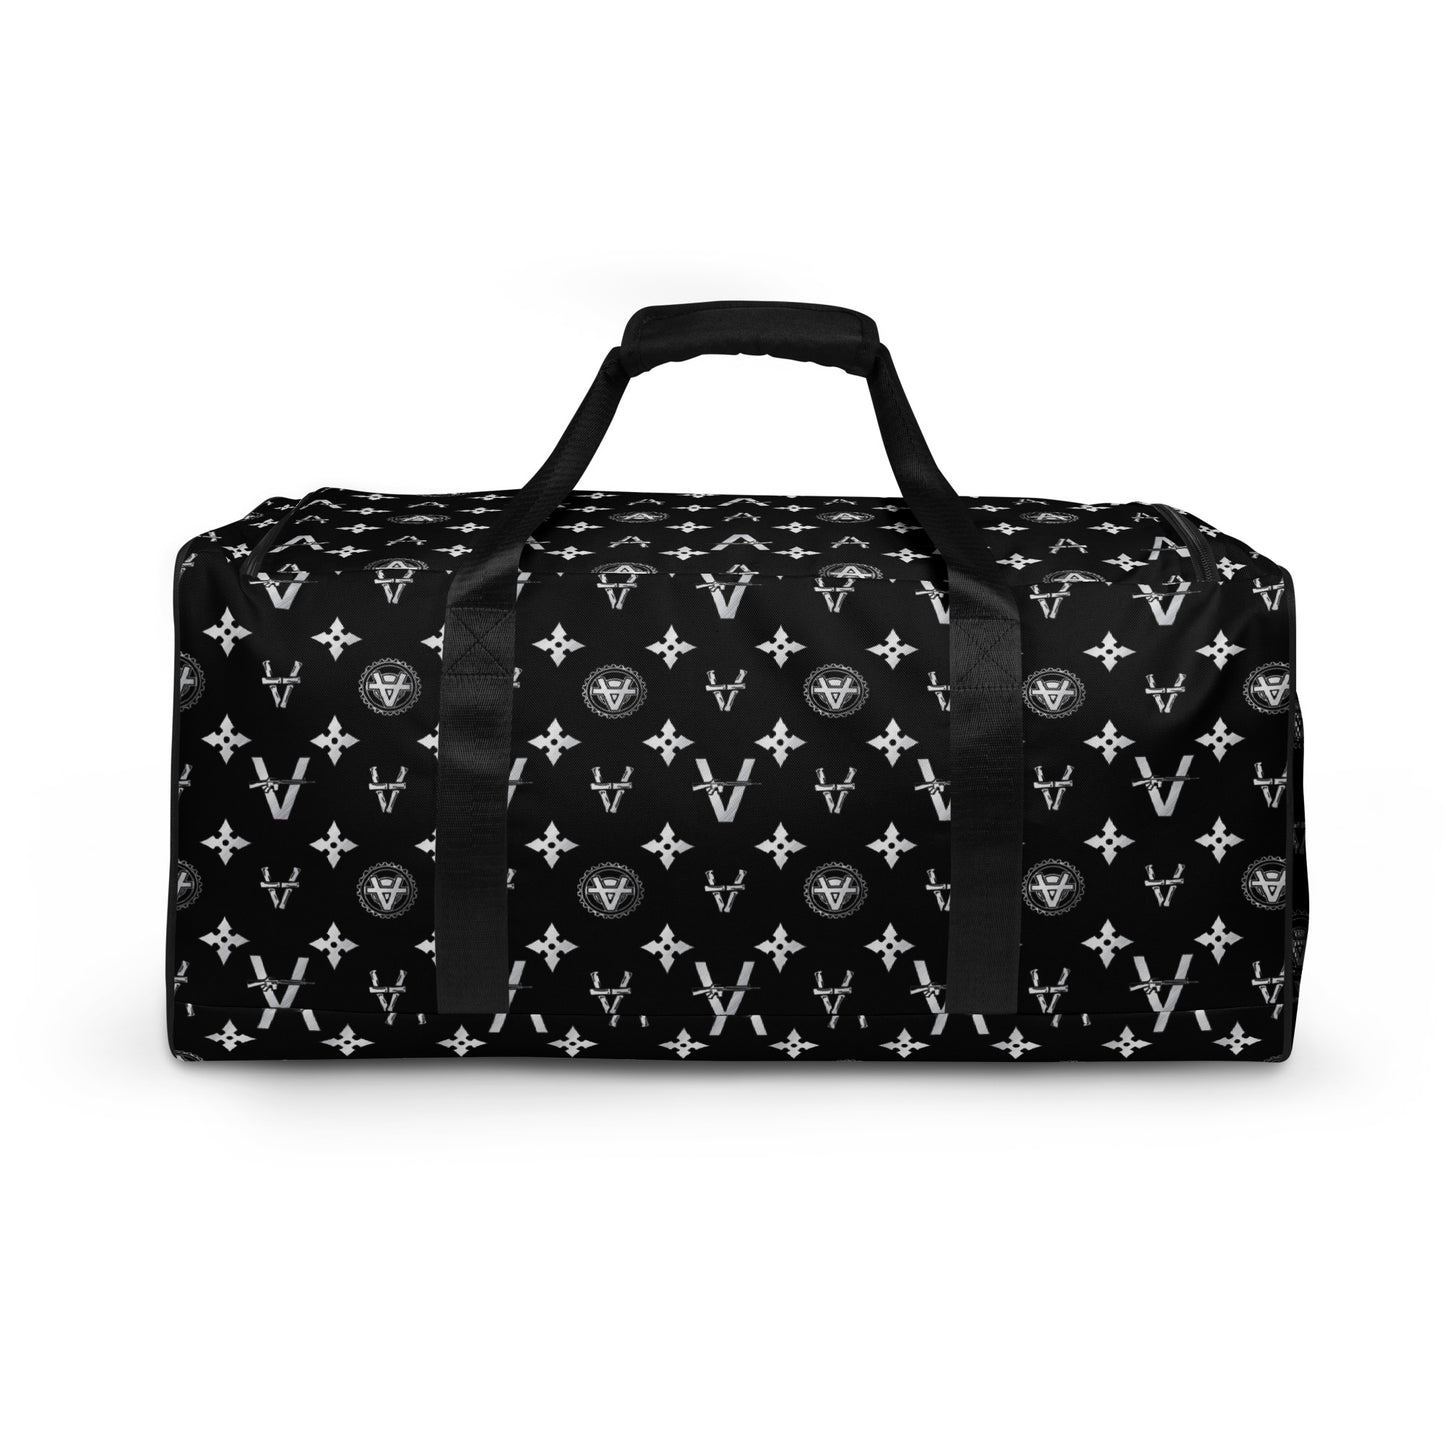 Vandals Silver and Black Duffle bag by Sergio Giorgini